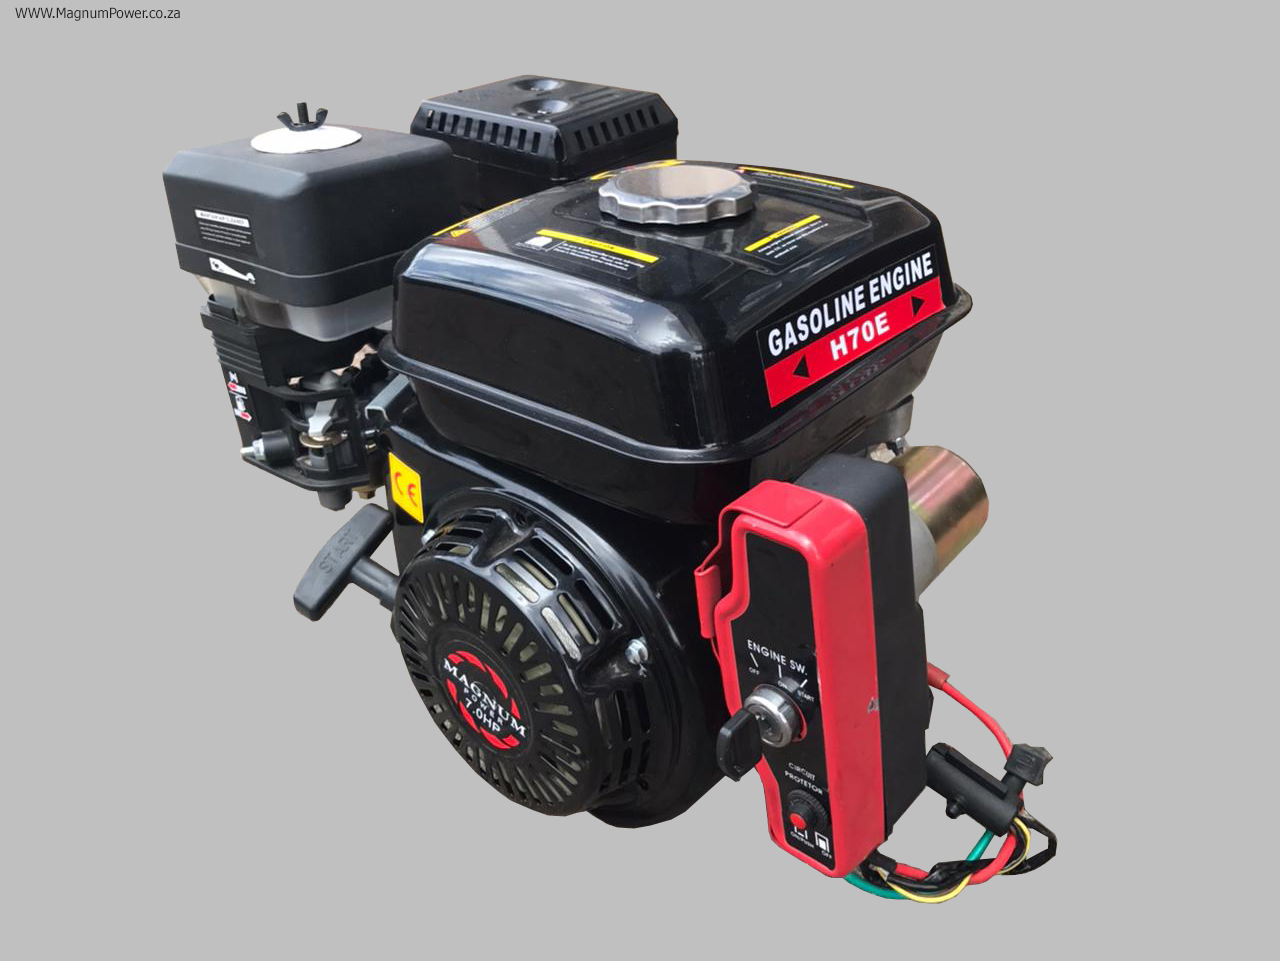 Engine: 7hp Petrol Engine with Electric Start Price incl Vat